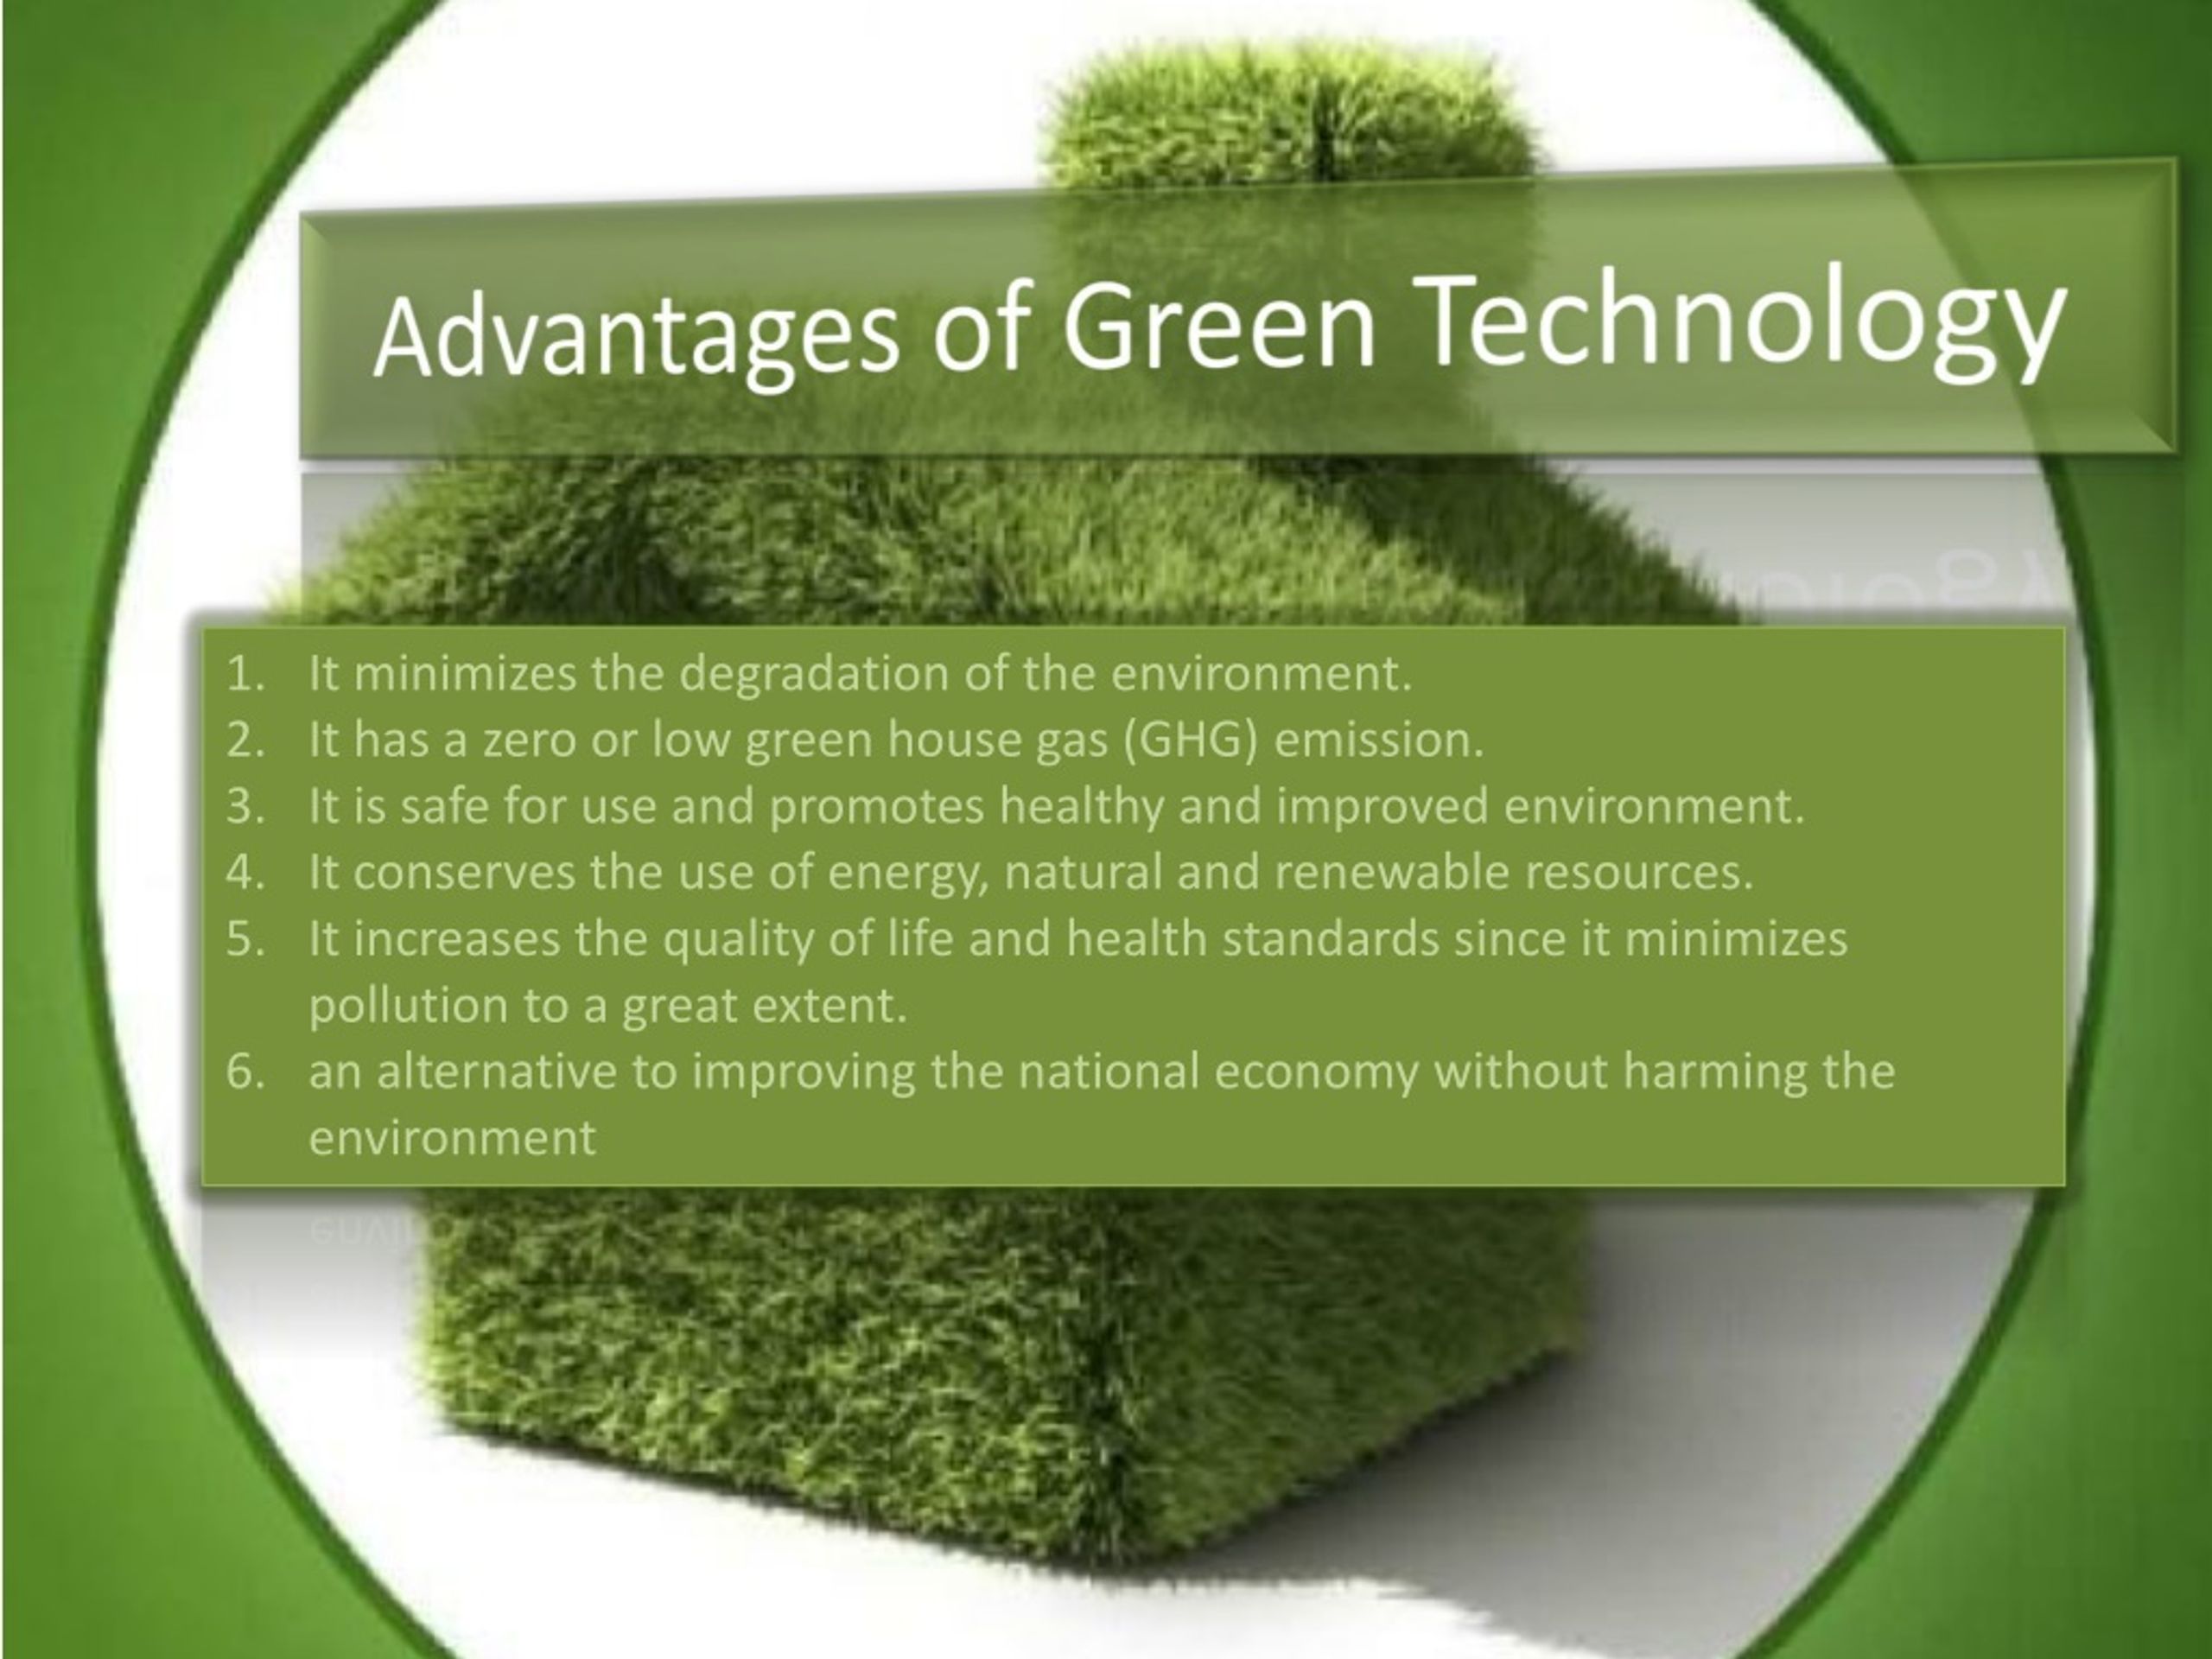 conclusion of green technology